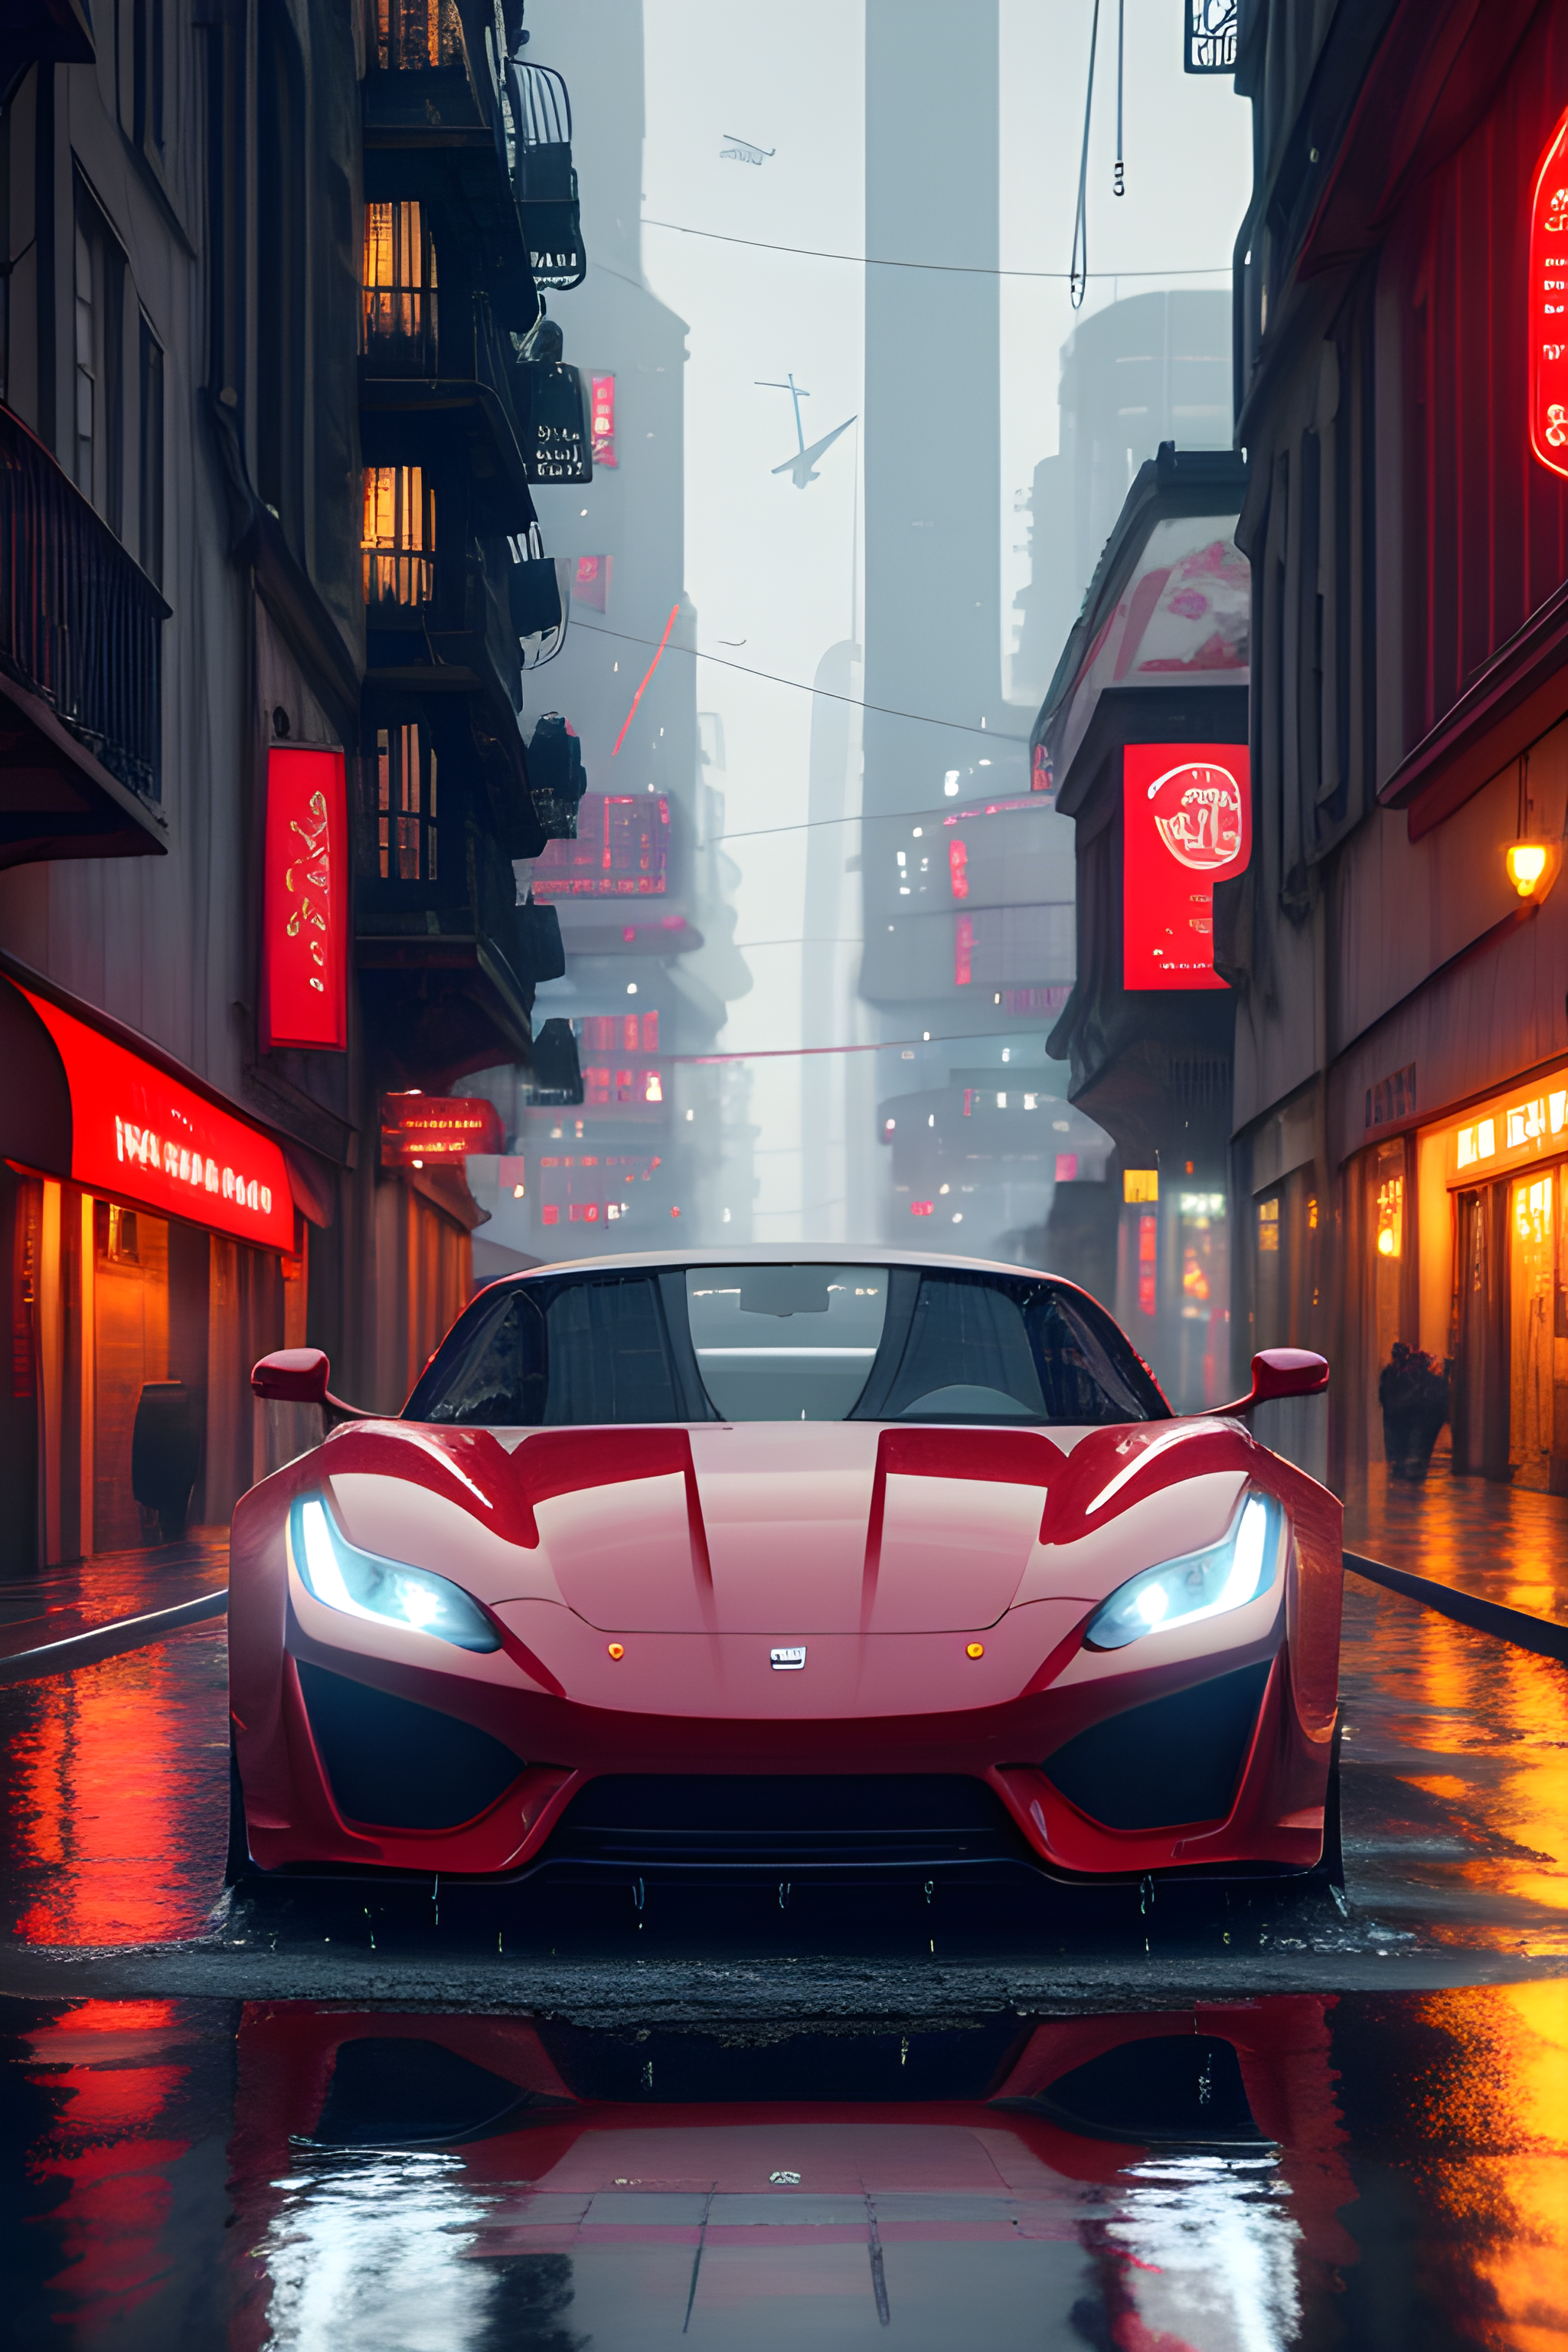 Image of a beautiful red sports car on wet street with reflections